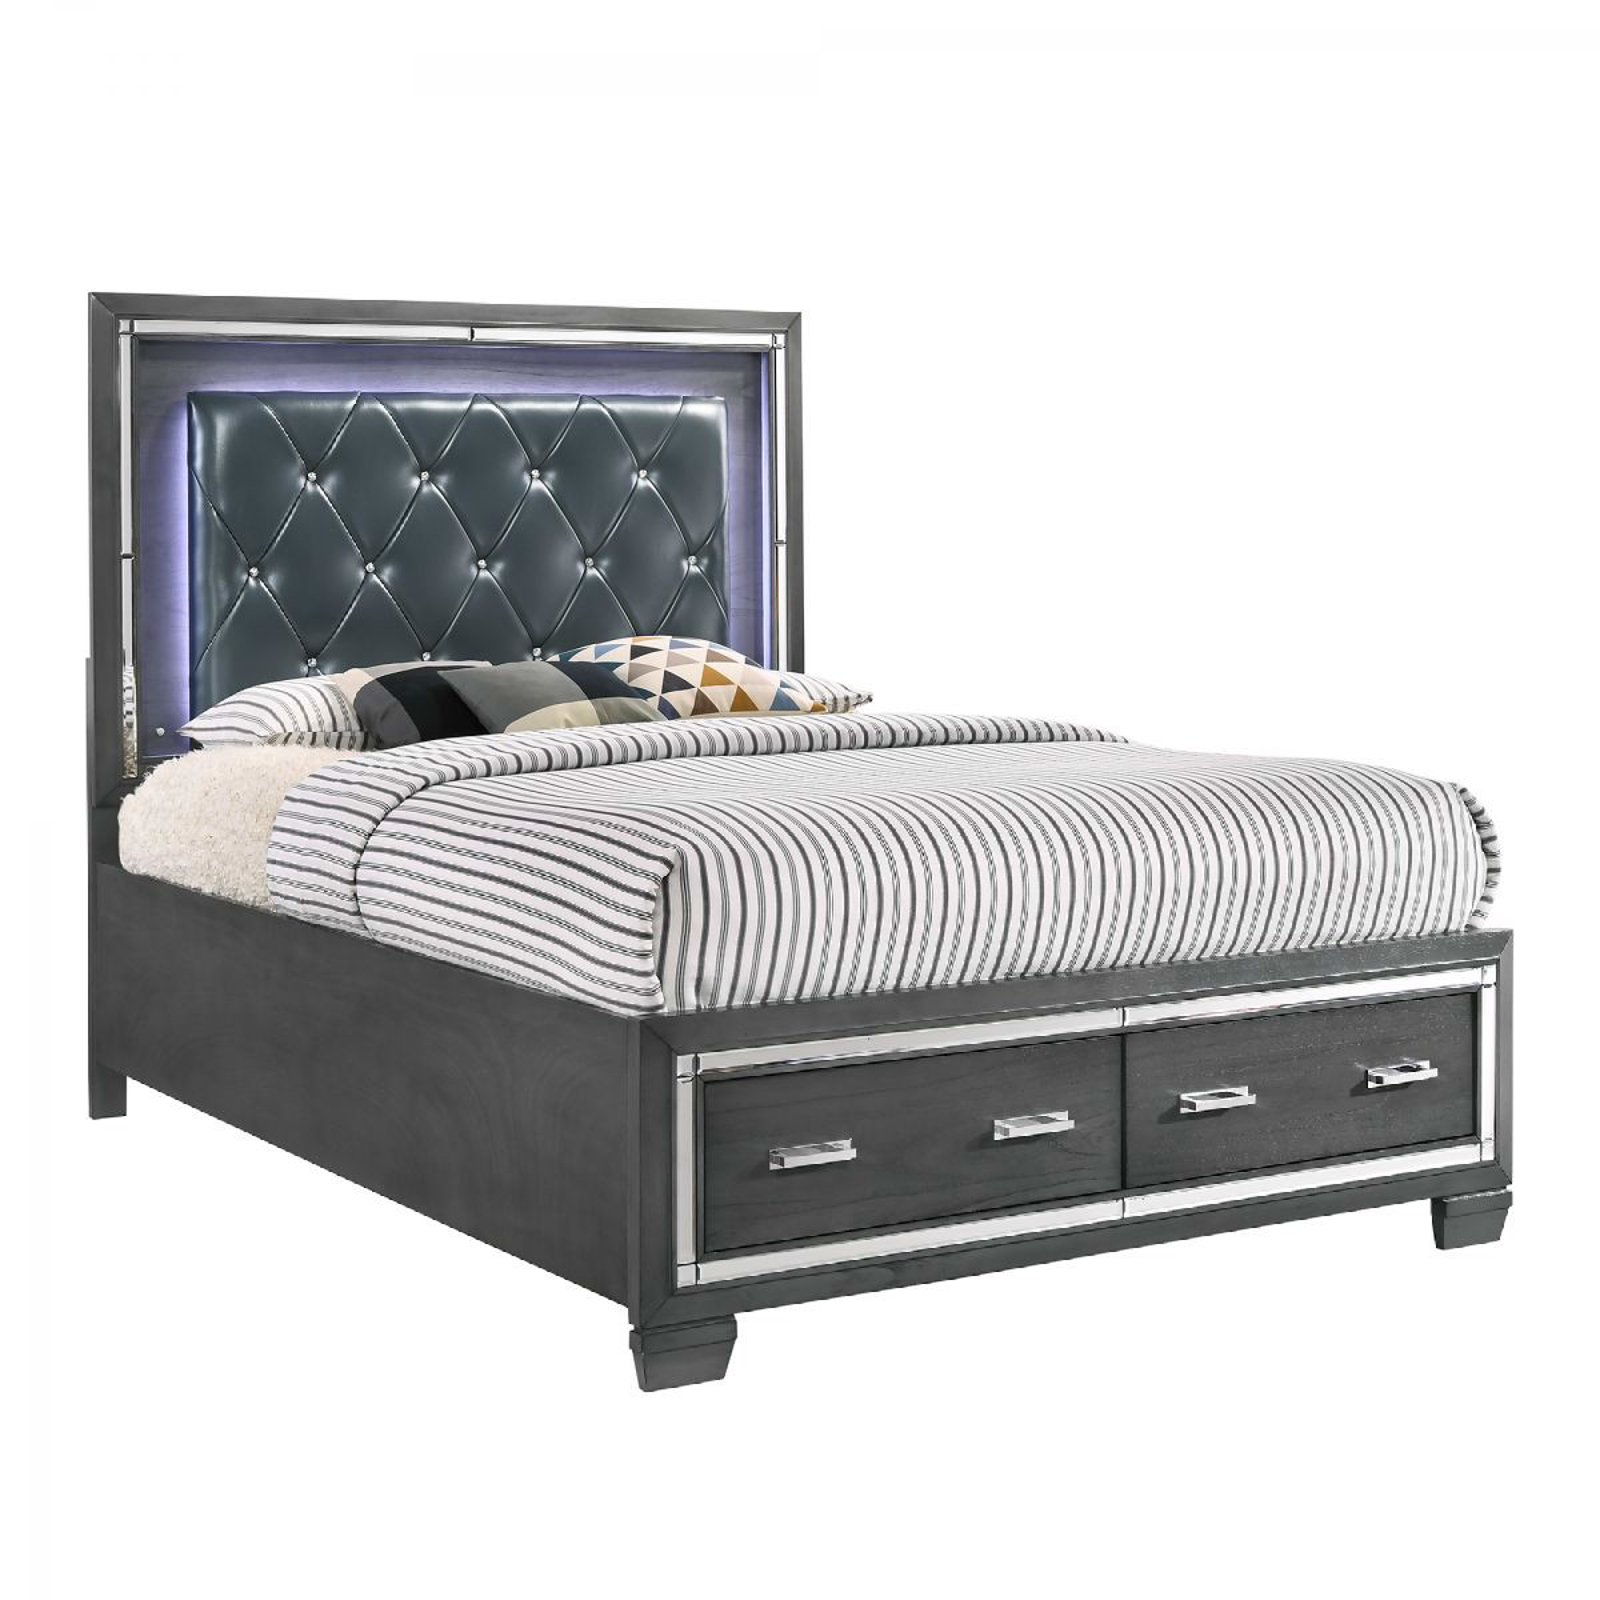 Picture of Elements Titanium King Size Bed